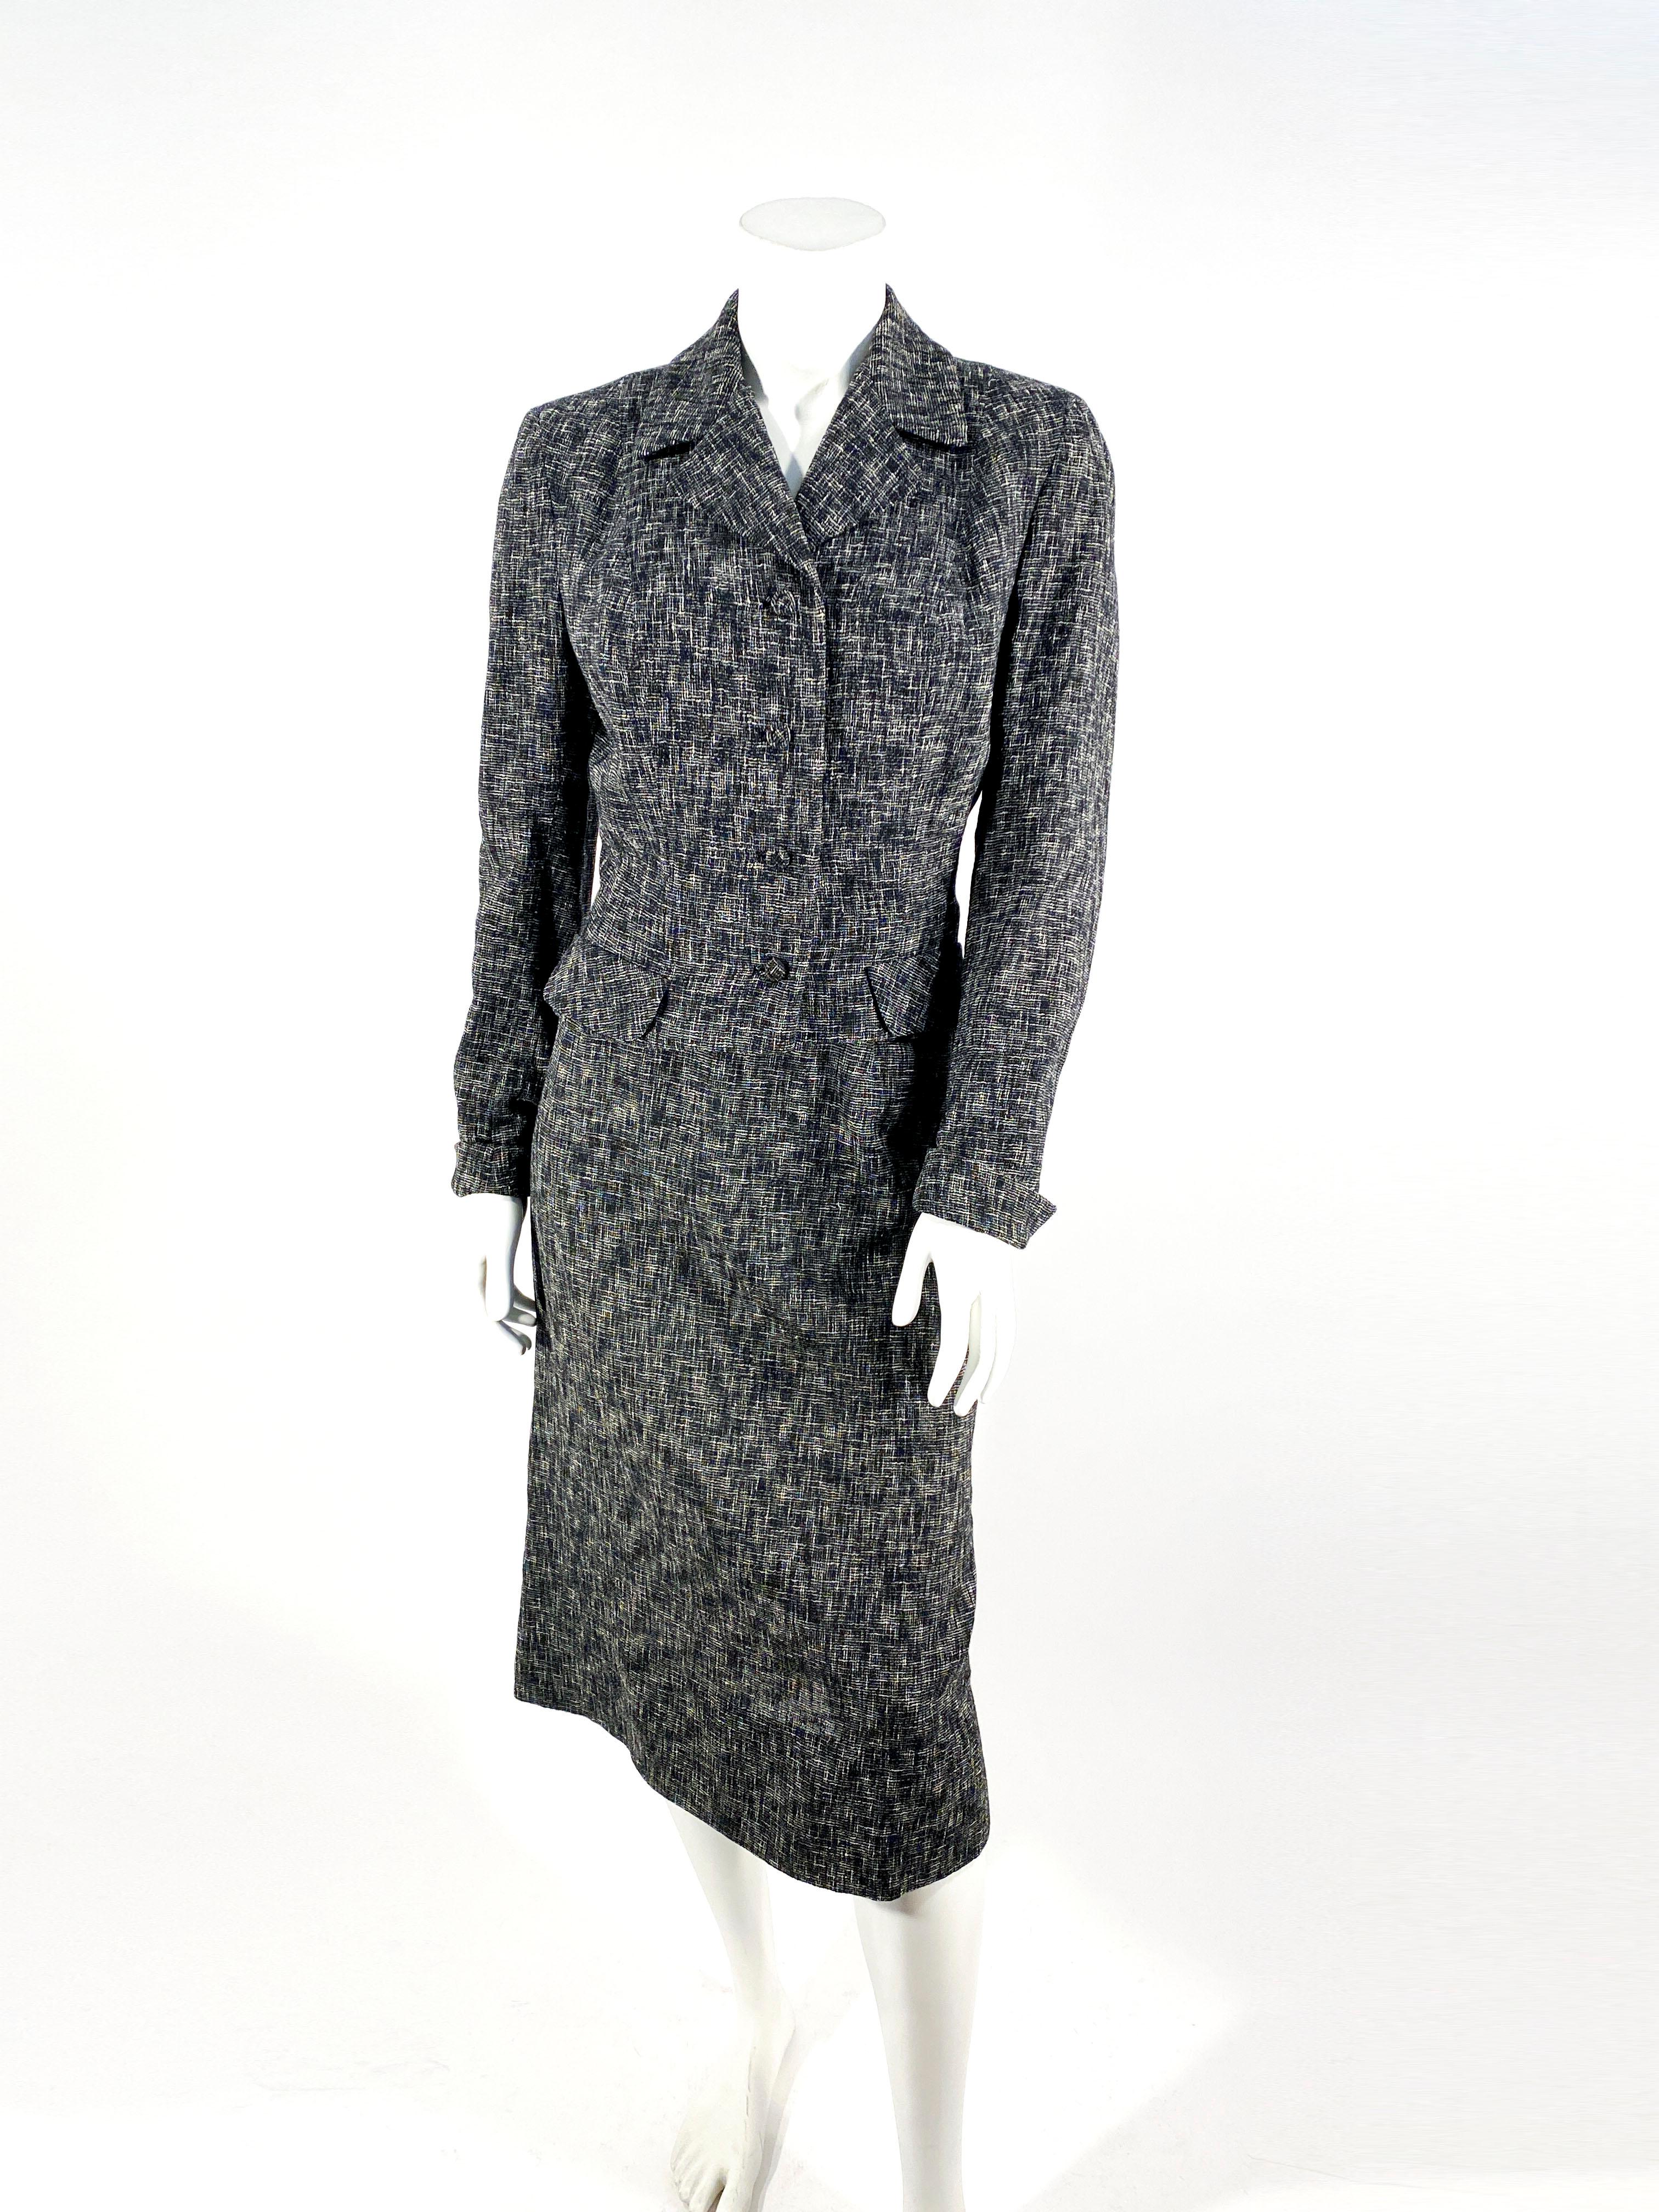 1950s black and grey flecked hadn't woven wool suit. The jacket has a tailored look with hand-covered buttons. The fabric is a summer weight wool and has modest shoulder padding.